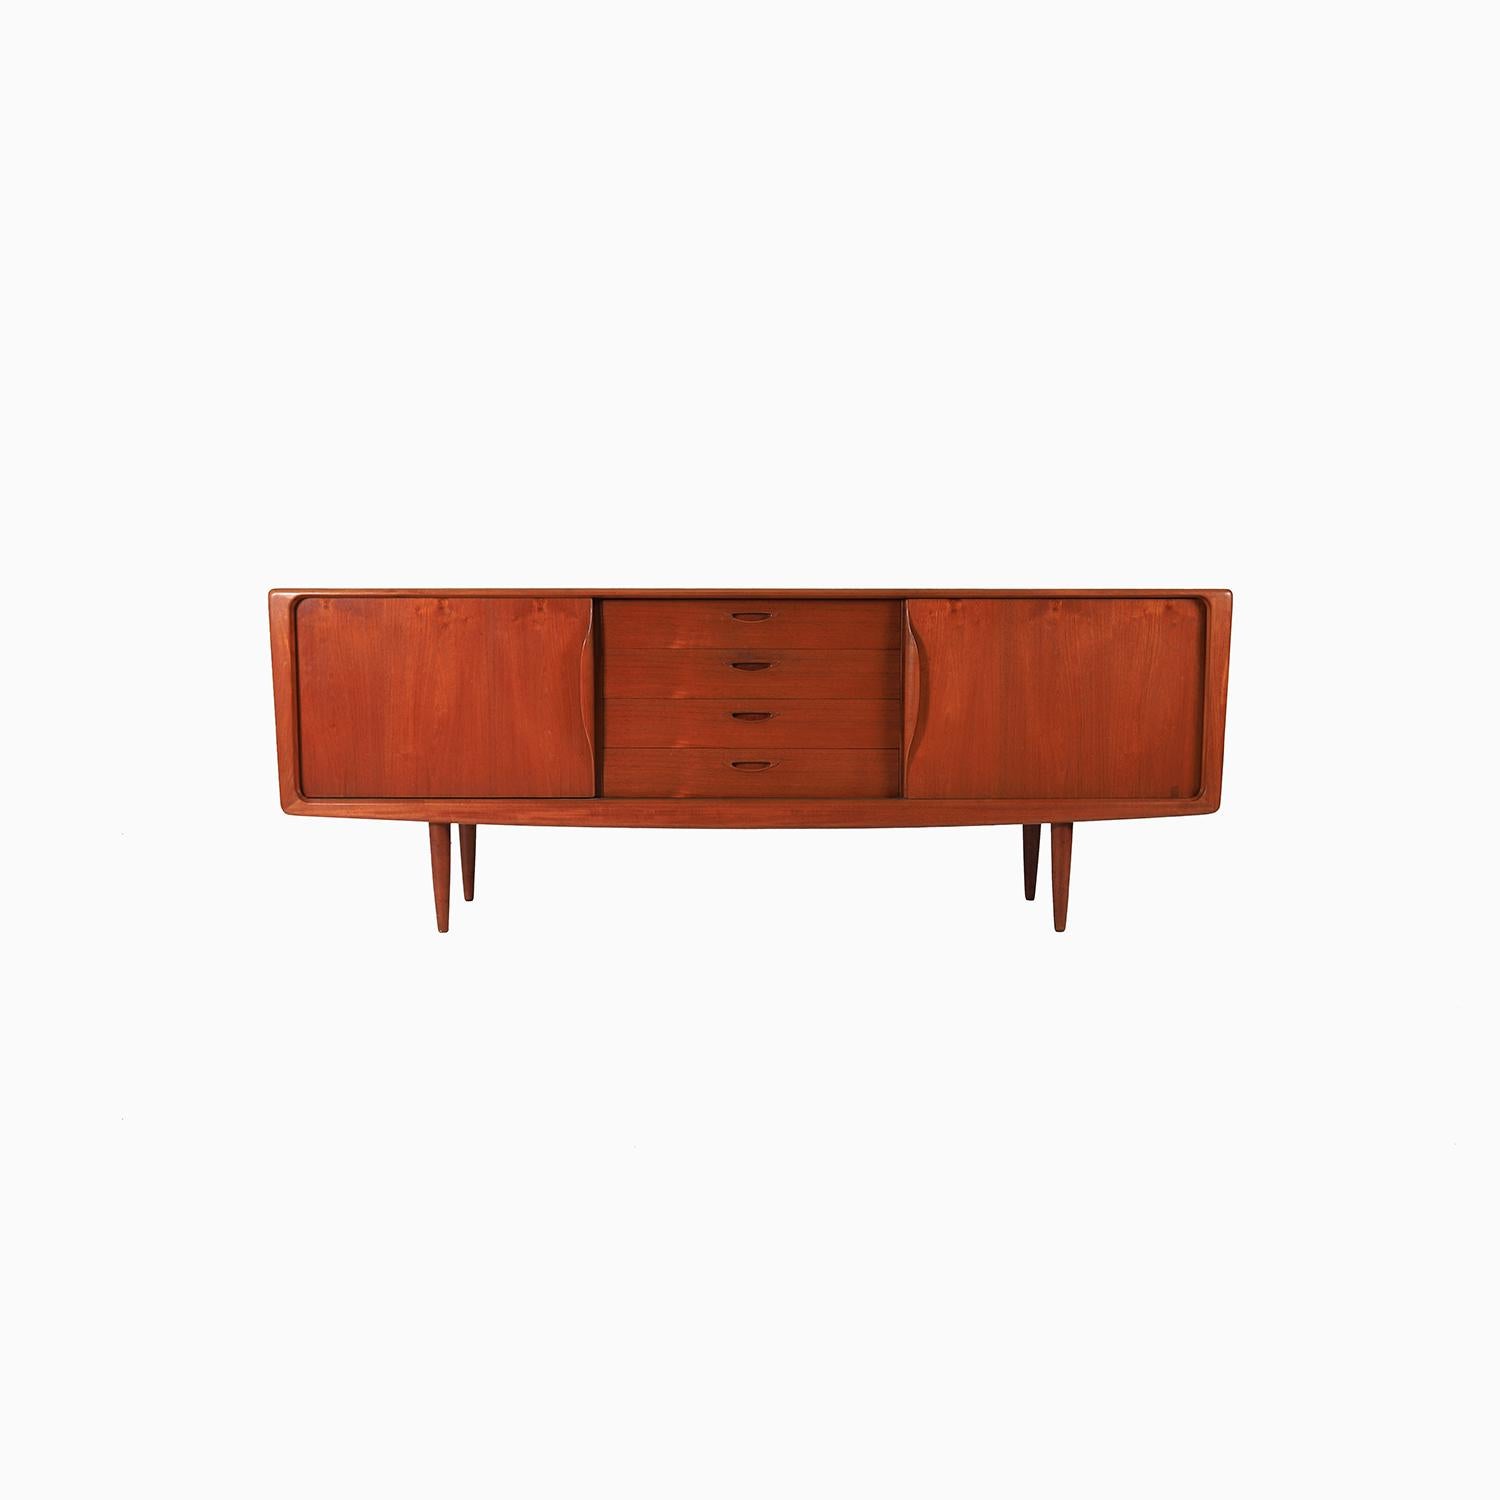 A very well made sideboard designed by HW Klein and produced by Bramin. A longer sideboard with plenty of storage options. A central stack of four drawers and flanking storage with adjustable shelving. Lots of really nice details on this piece.